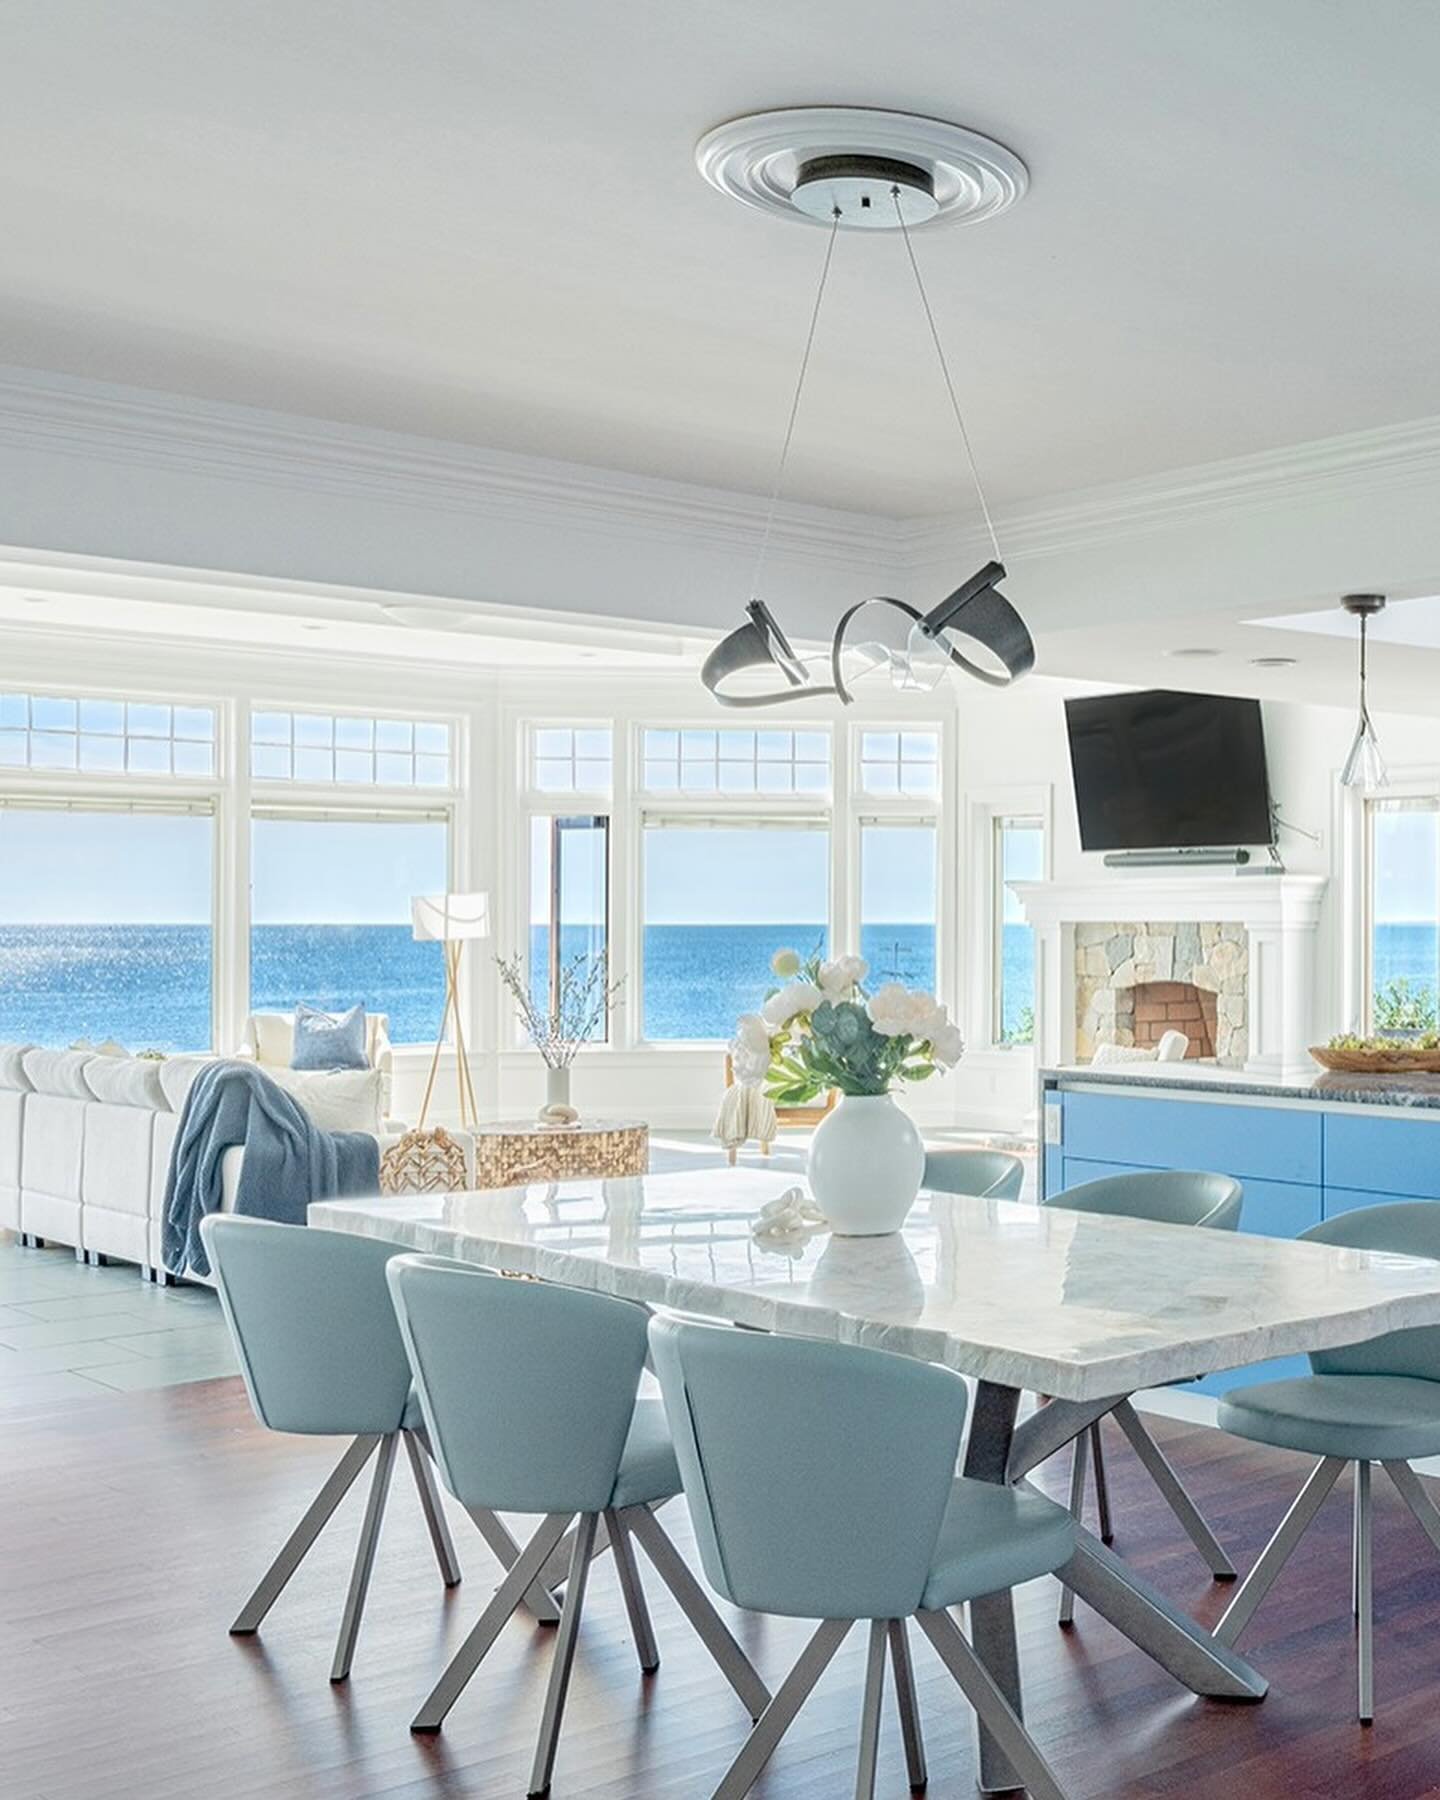 This nice weather has us thinking about this one of a kind blue kitchen on the water we did in Marblehead last year - in collaboration with @gcanner001 

It&rsquo;s a bold color to be sure, but when you have an opportunity to color match the ocean ou